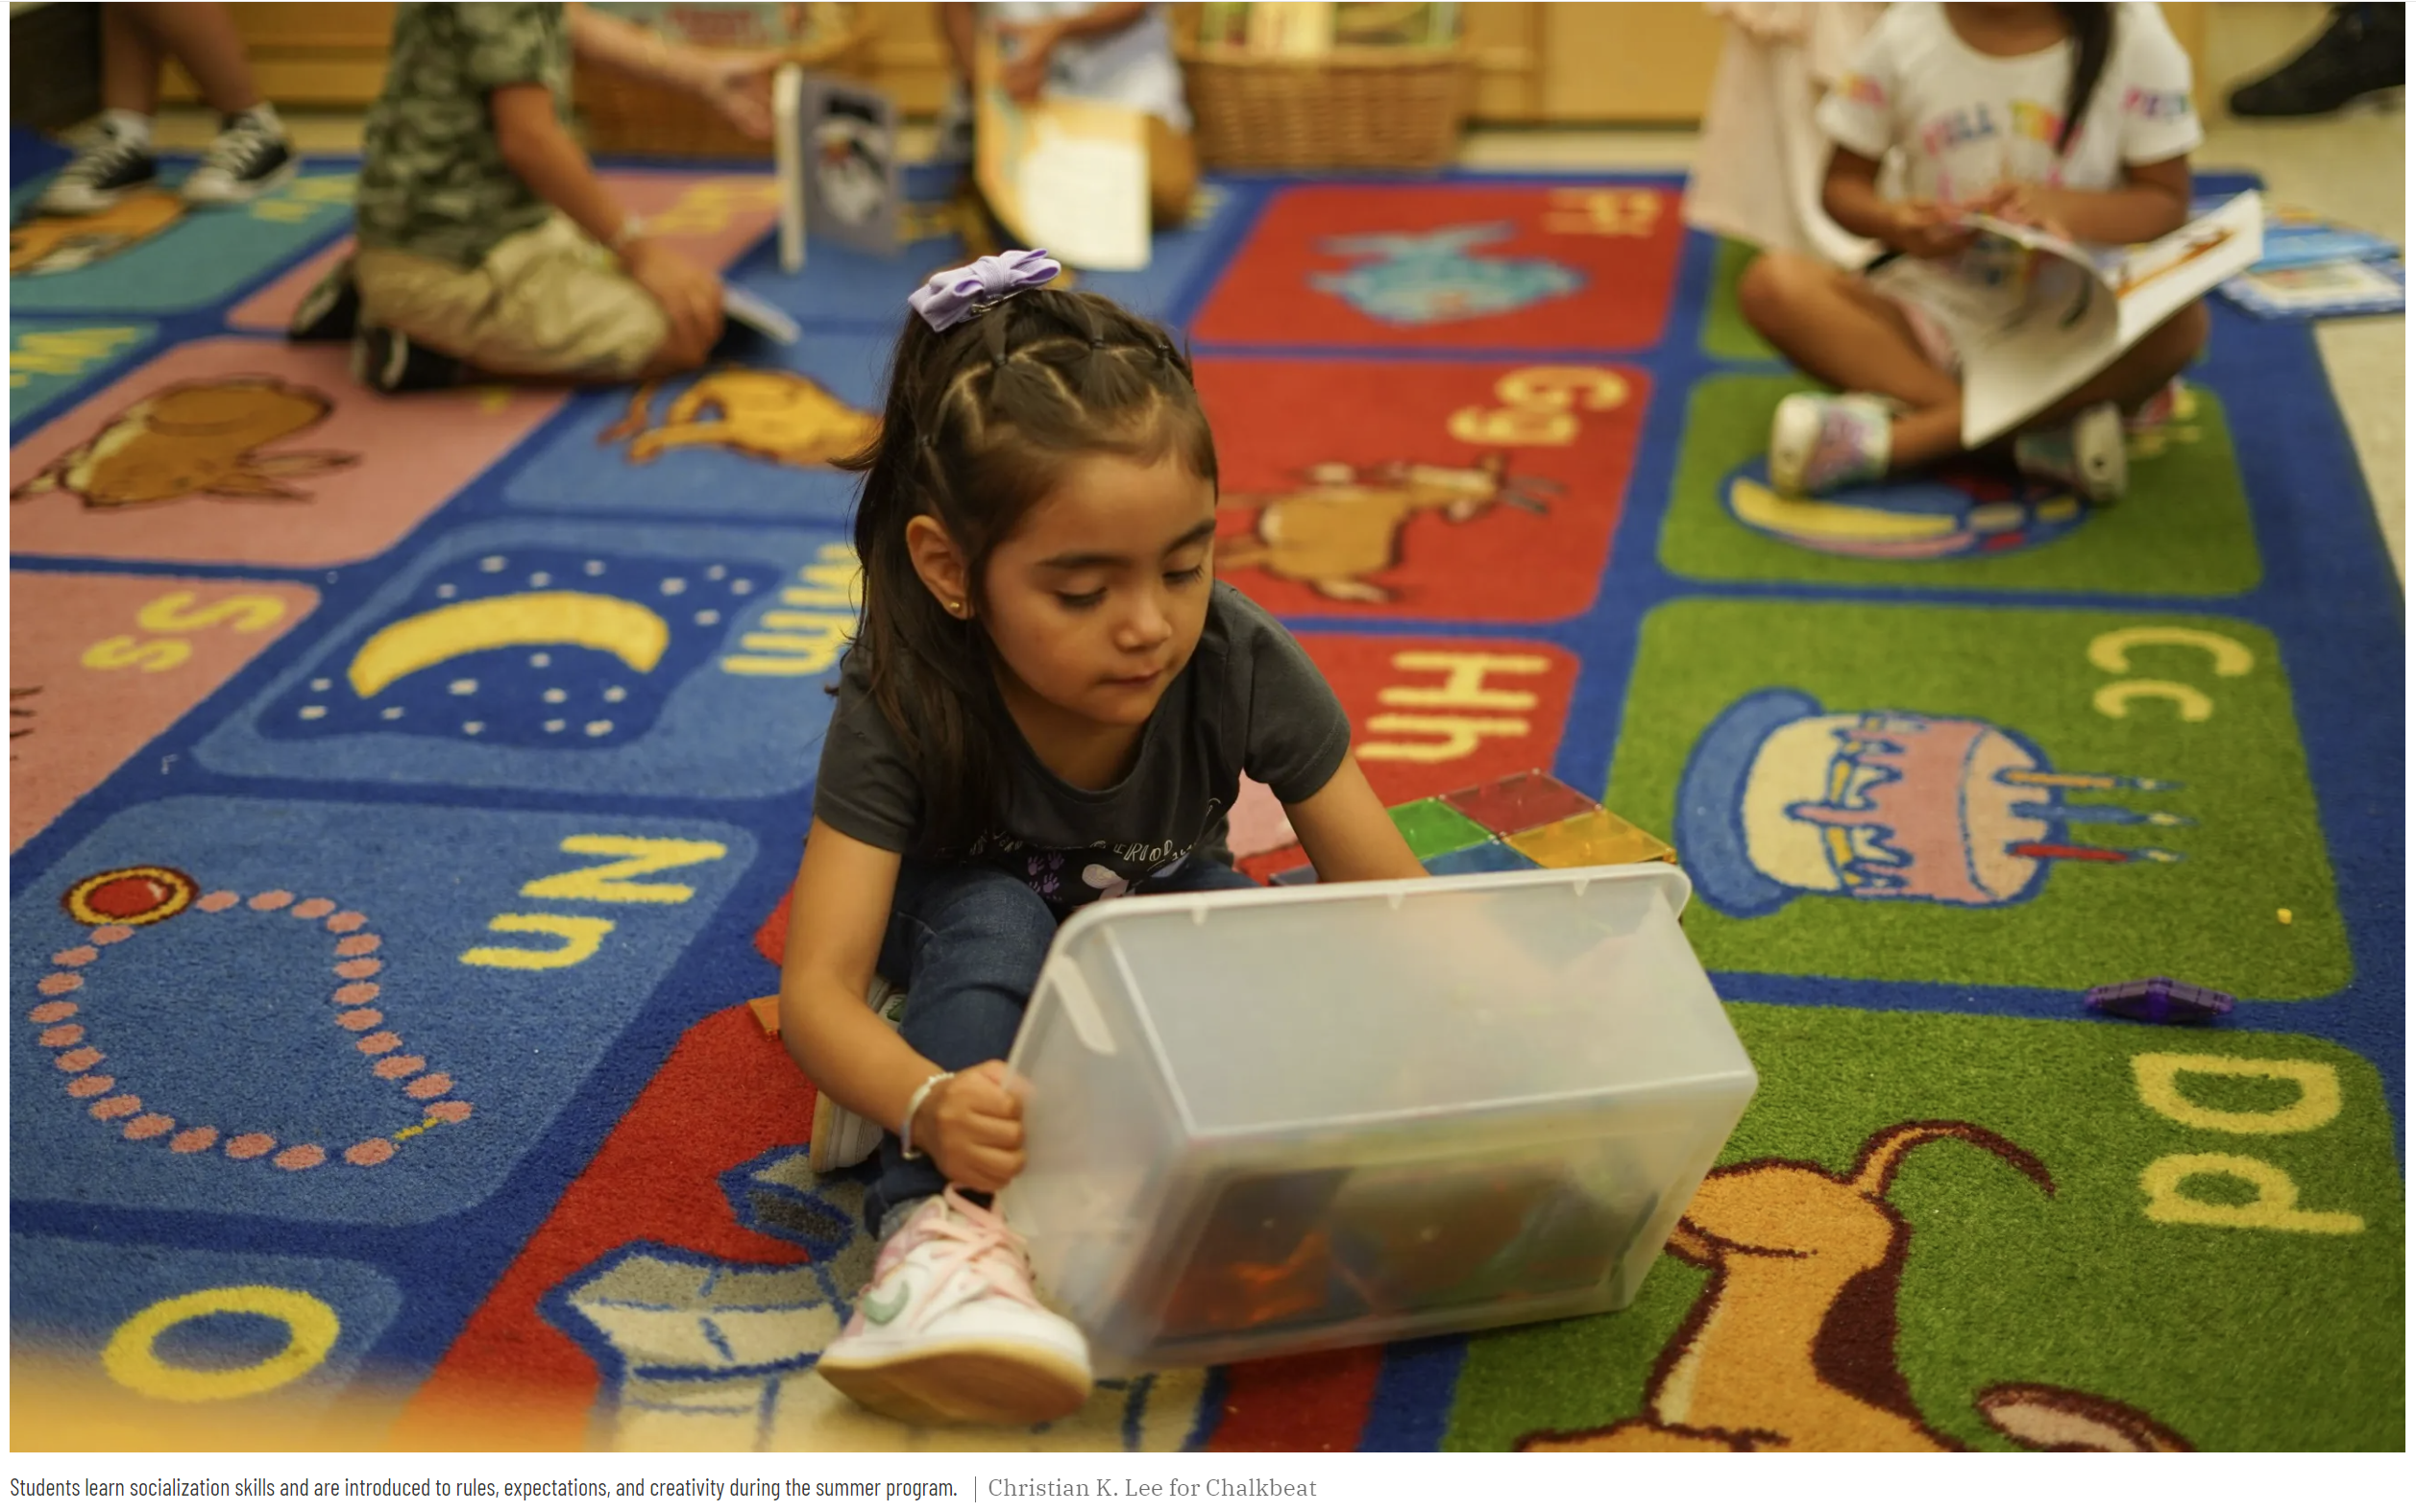 A young girl sits on a colorful rug in preschool and looks through a plastic bin filled with toys and other learning tools. Photo credit: Chalkbeat